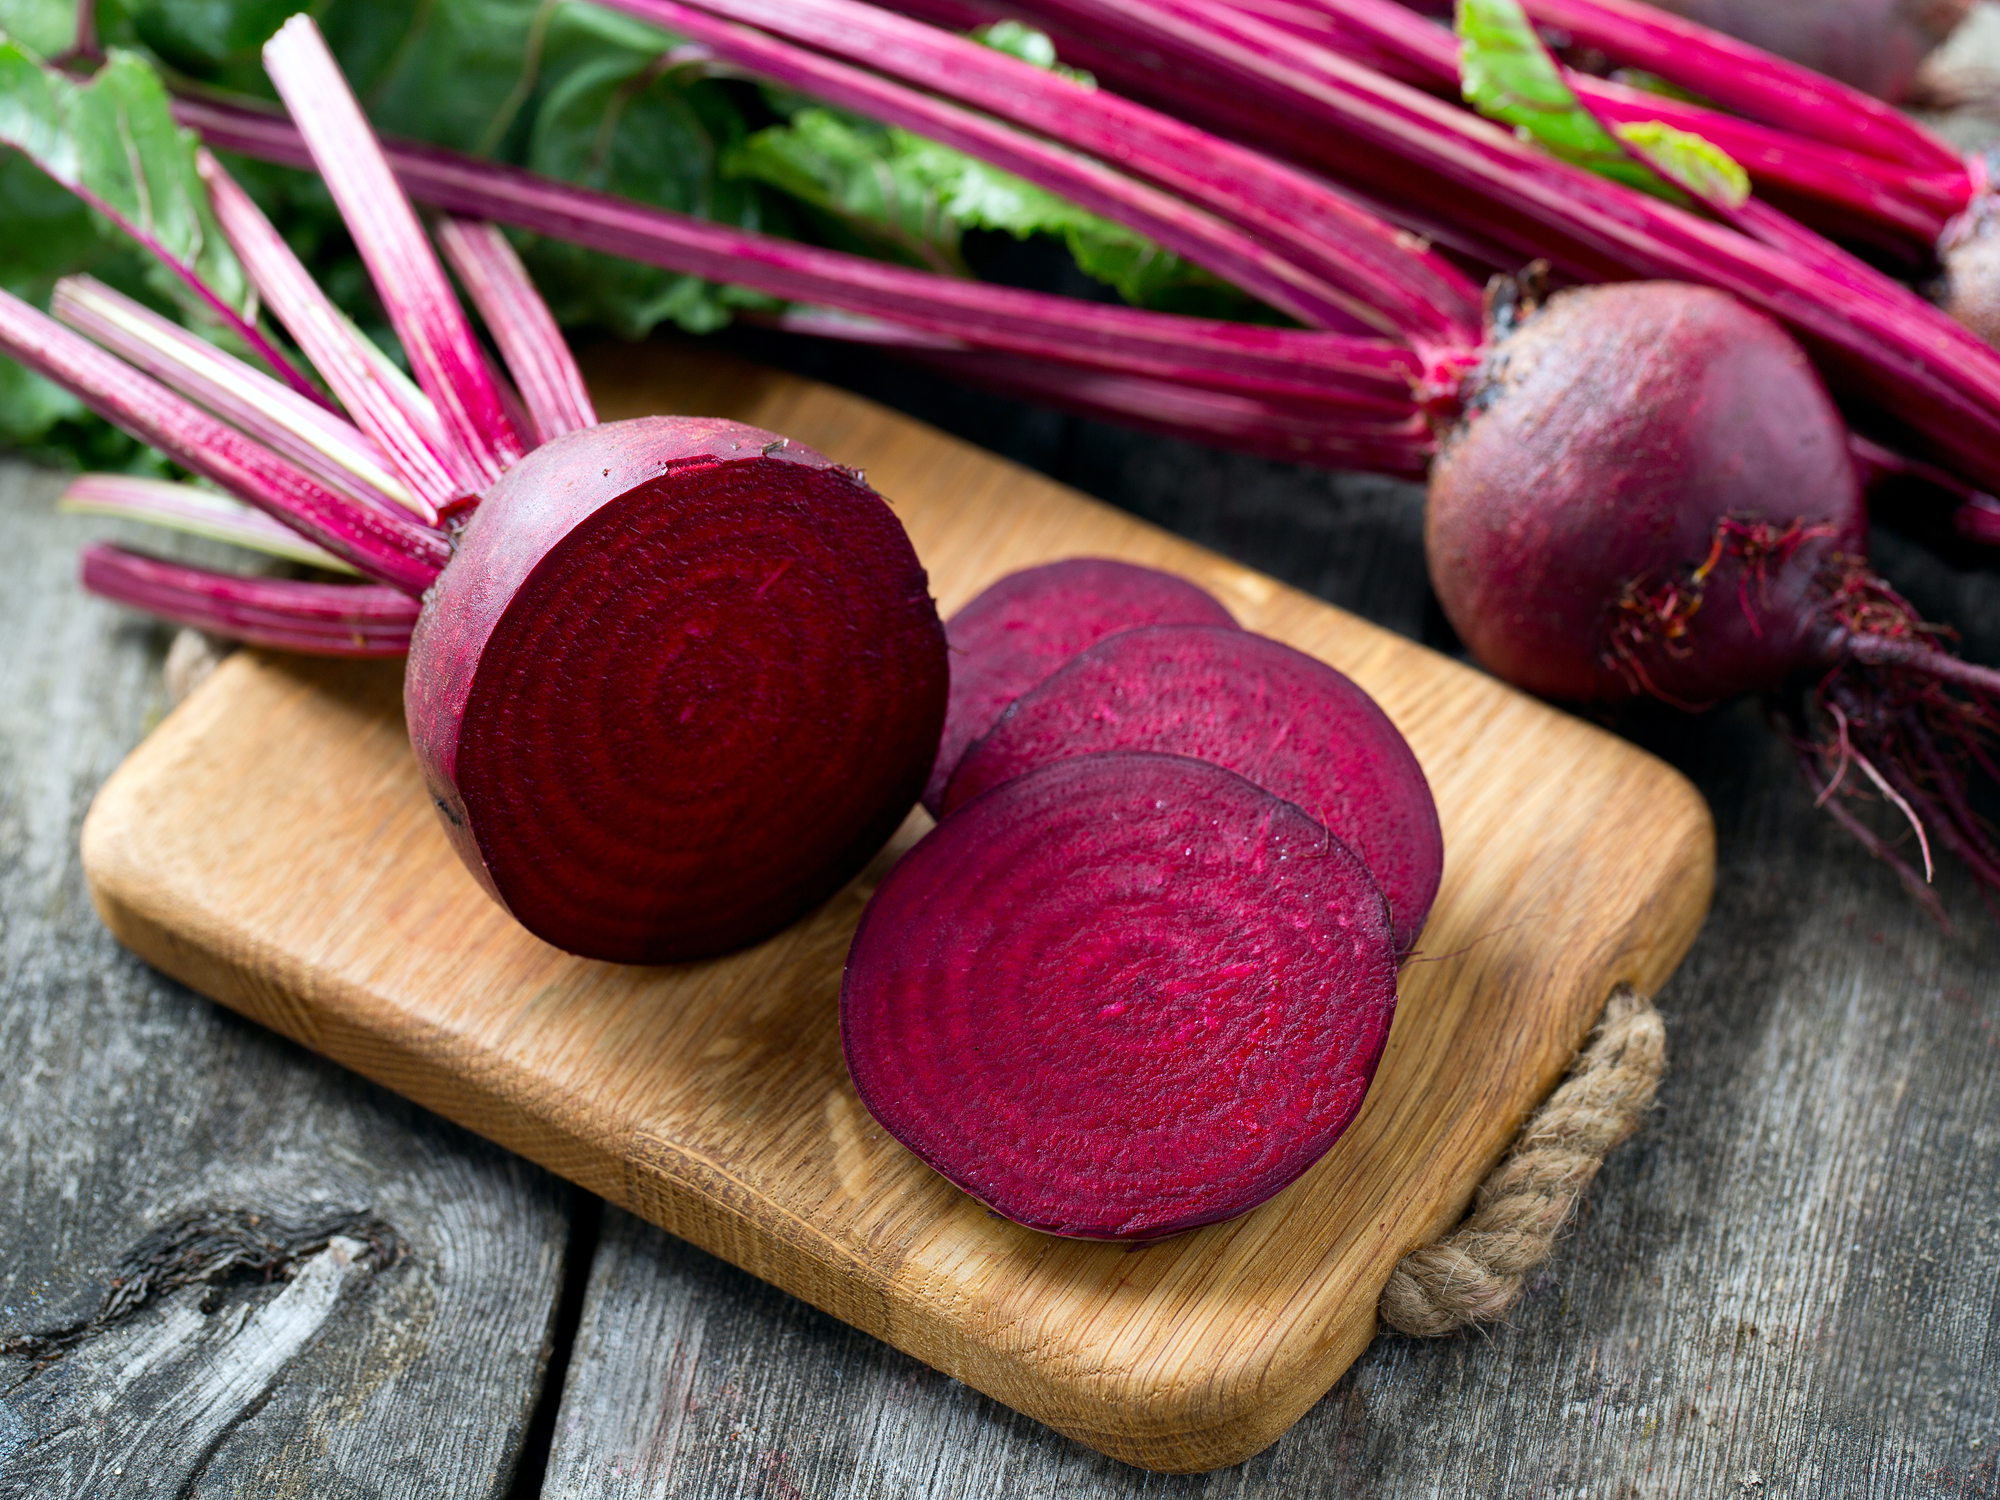 For lowest BP, eat your beets this way